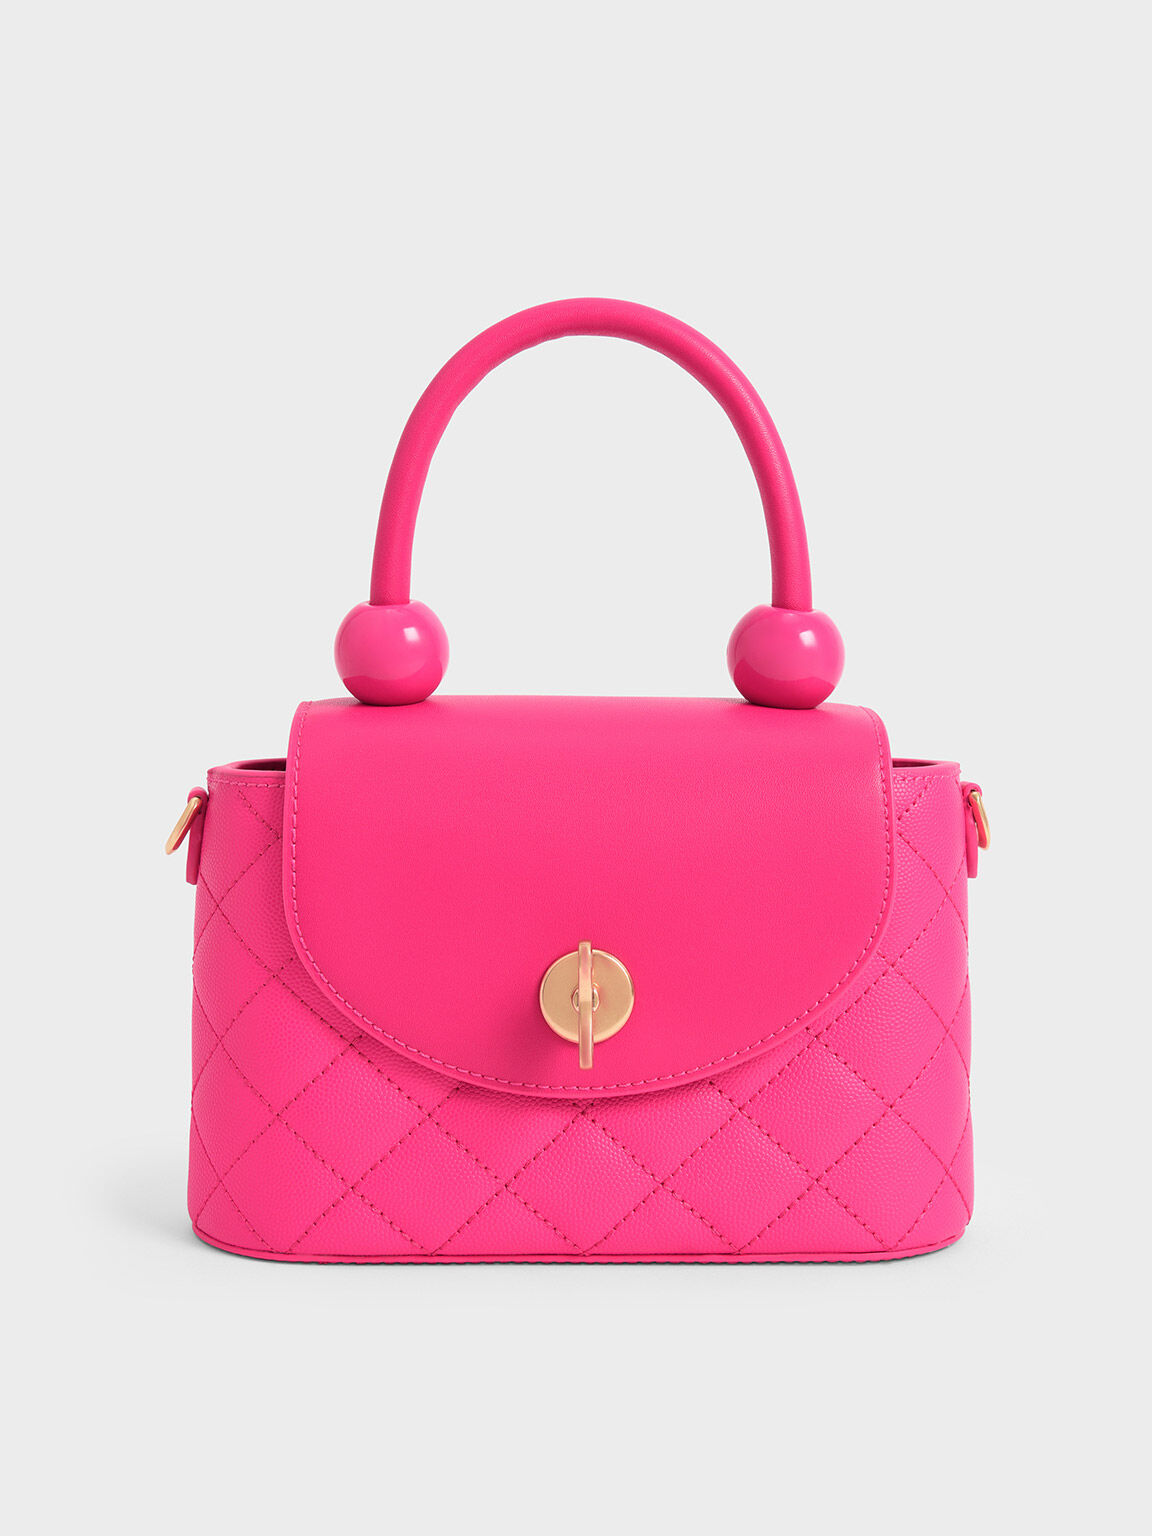 Yuzefi Dolores Fuchsia Leather Bag in Pink | Lyst